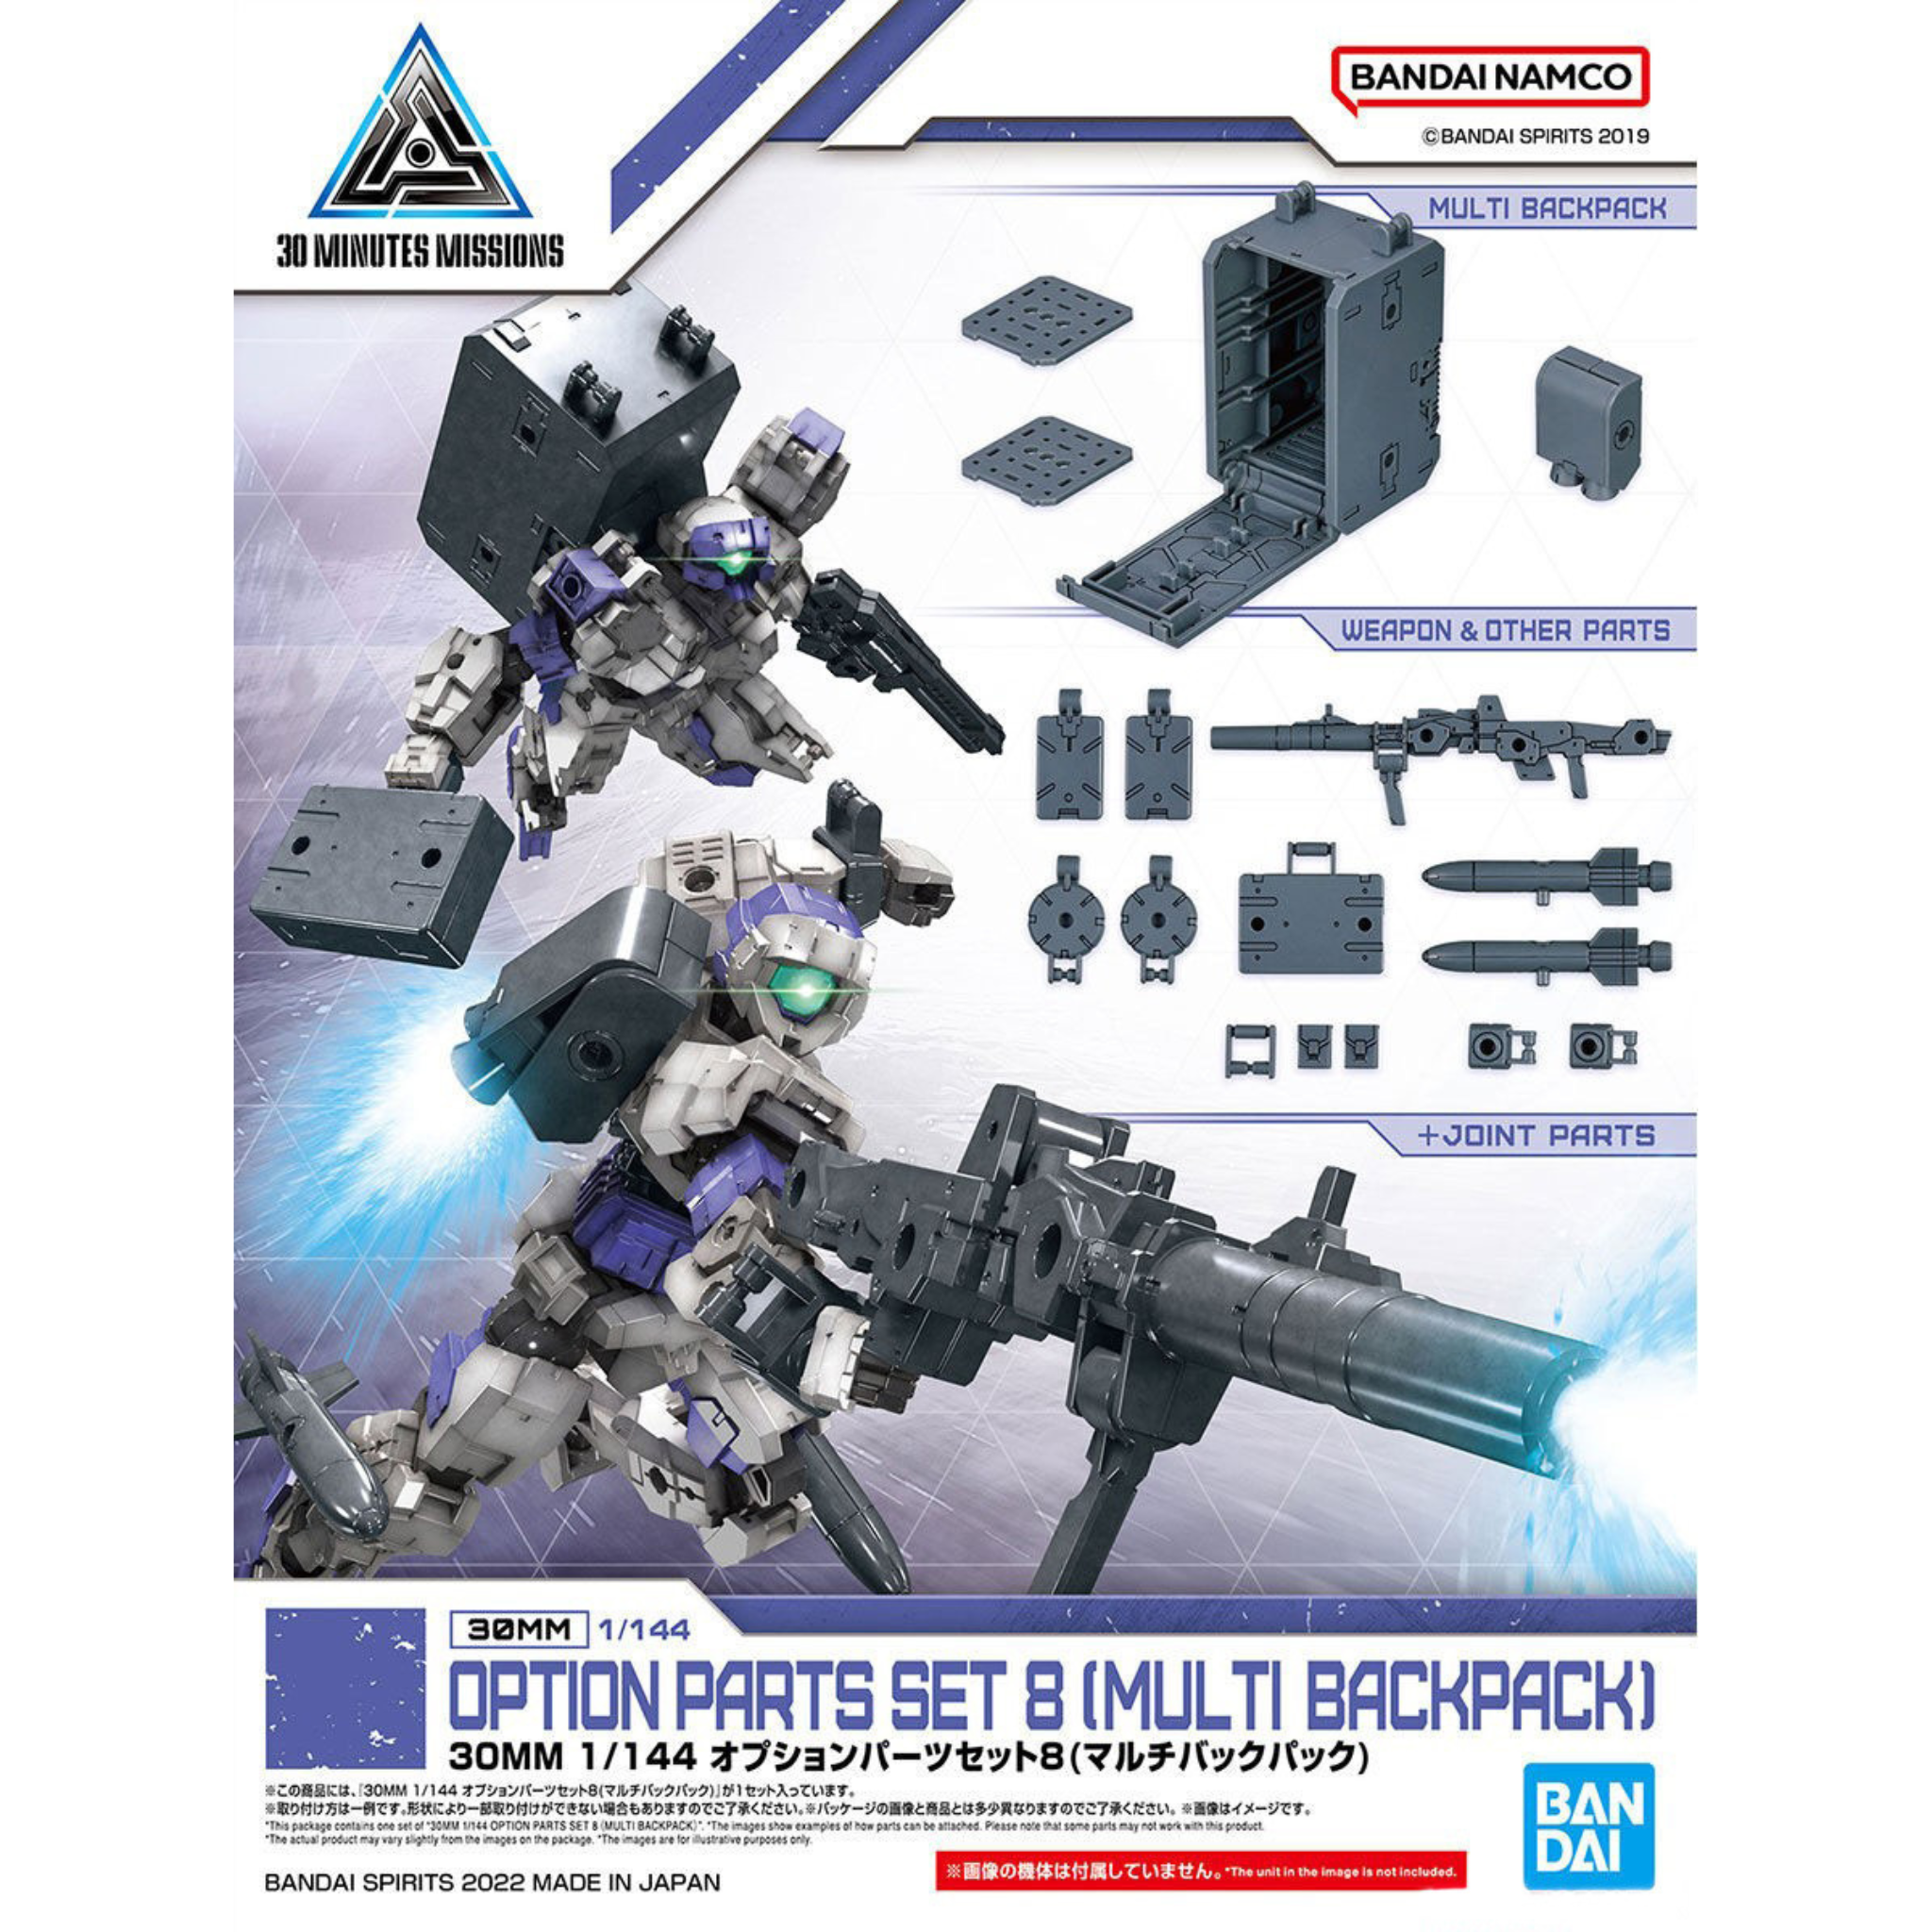 Option Parts Set 8 (Multi Backpack) 1/144 30 Minutes Missions Accessory Model Kit #5063388 by Bandai